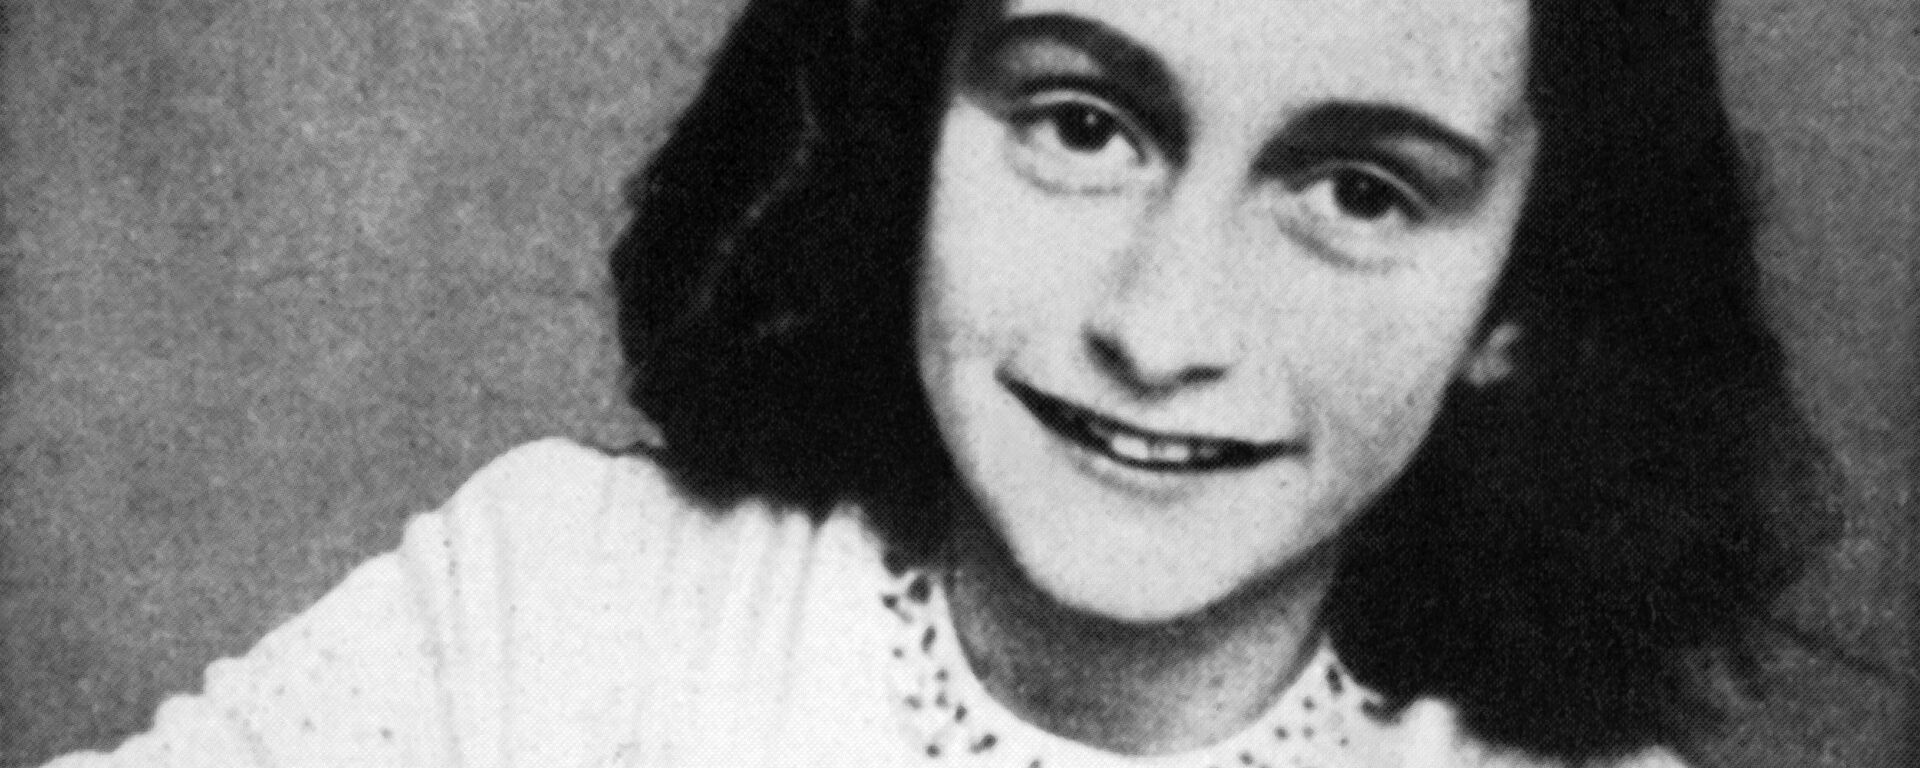 A picture released in 1959 shows a portrait of Anne Frank who died of typhus in the Bergen-Belsen concentration camp in May 1945 at the age of 15 - Sputnik International, 1920, 25.01.2022